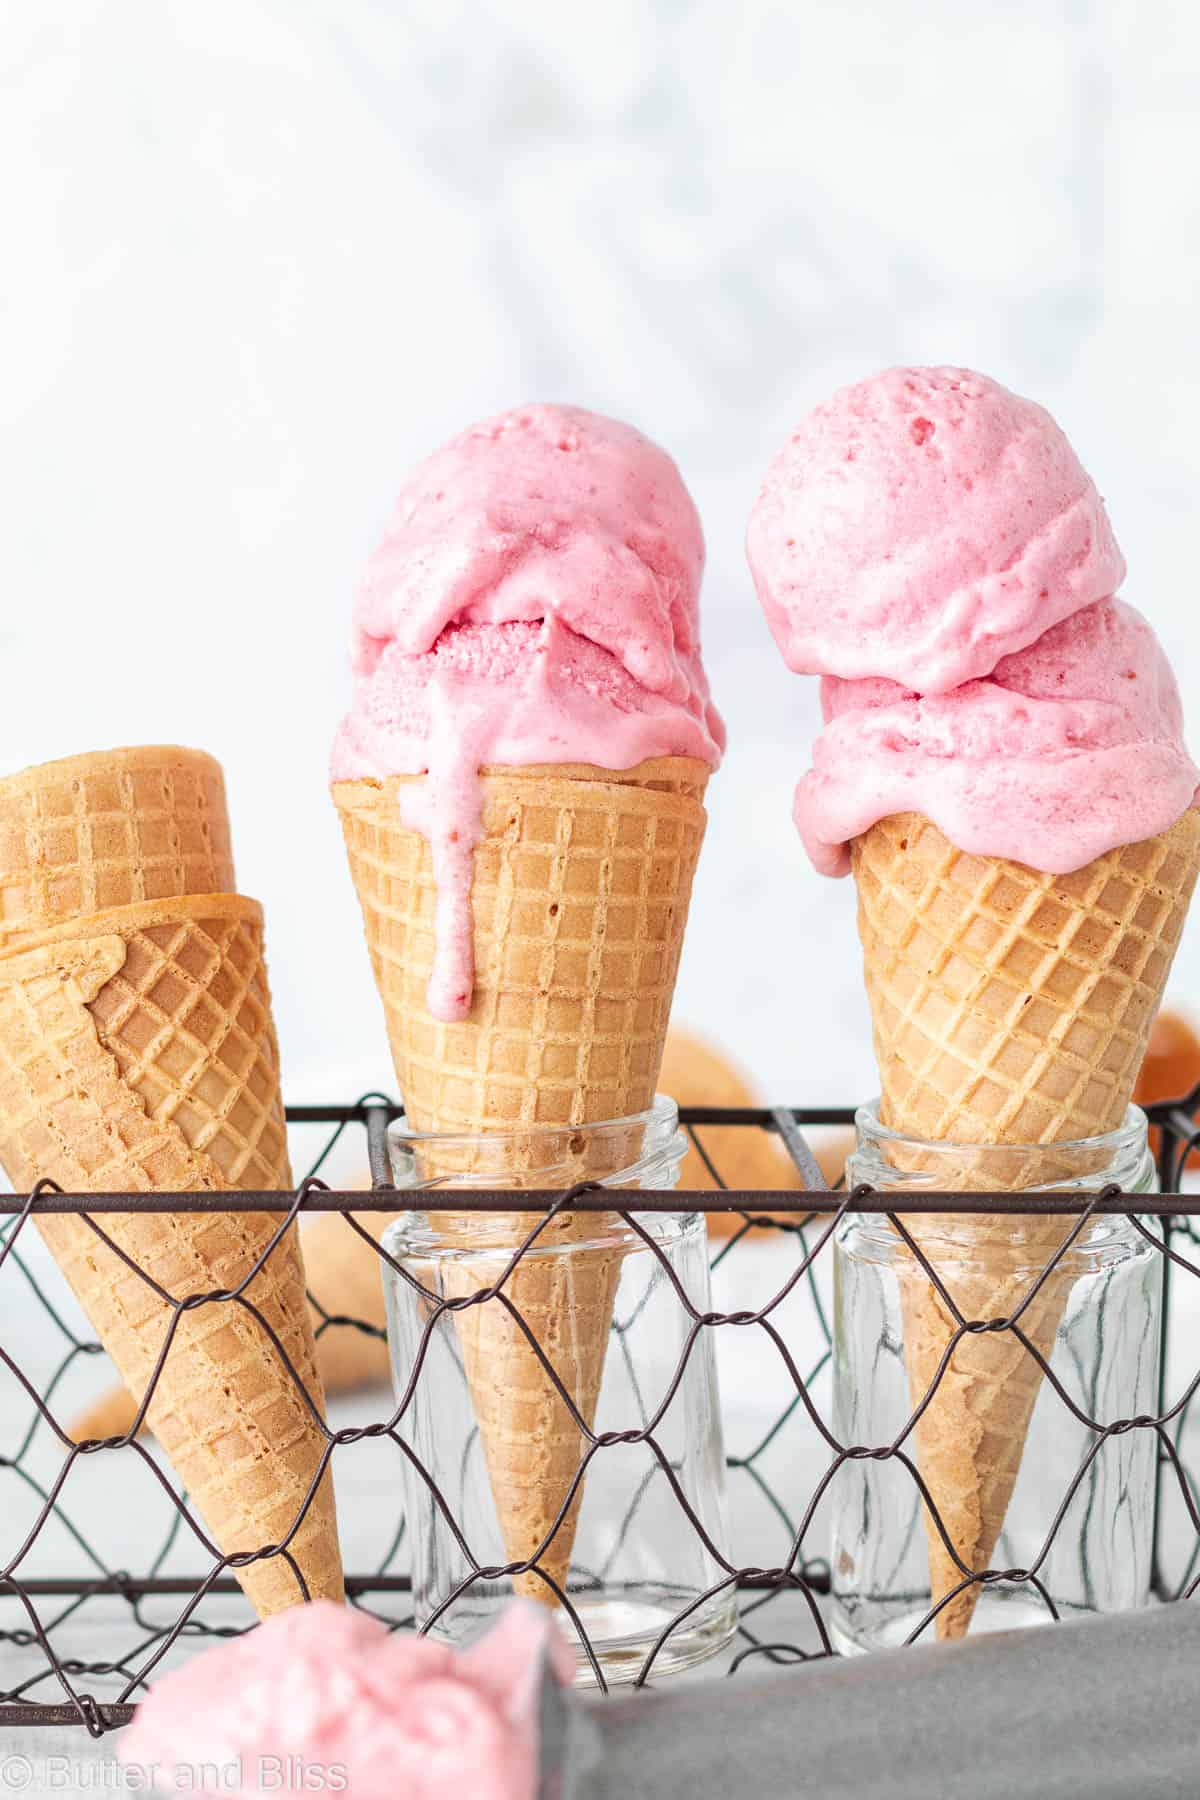 Dairy free strawberry ice cream scoops on two sugar cones